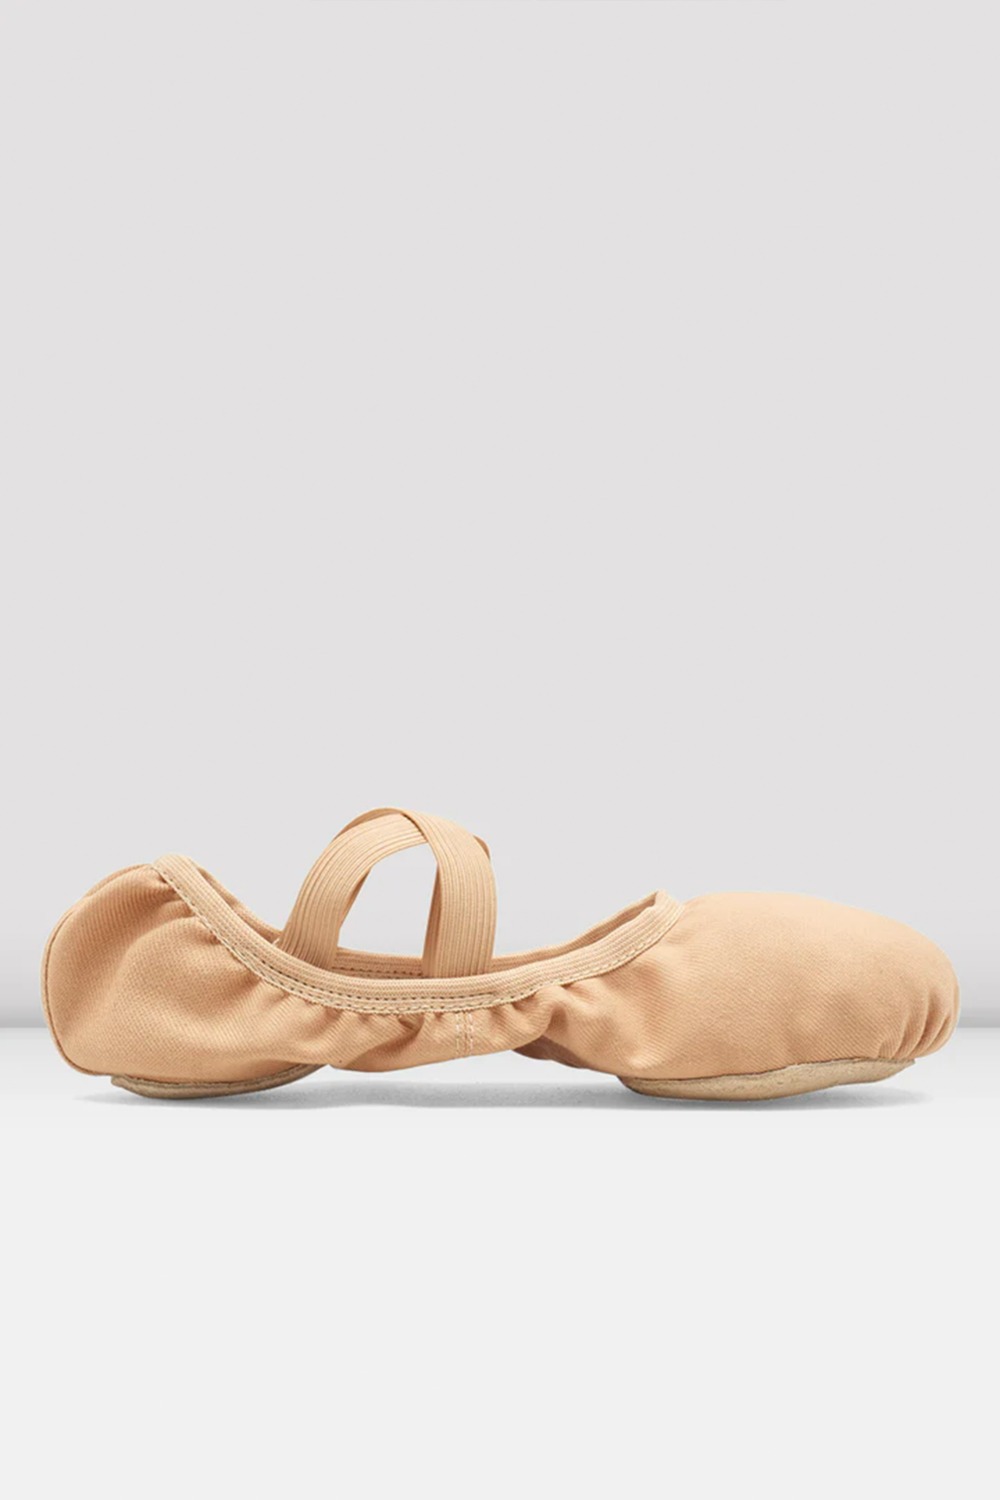 PERFORMA STRETCH CANVAS BALLET SHOES - SAND - NISARAT